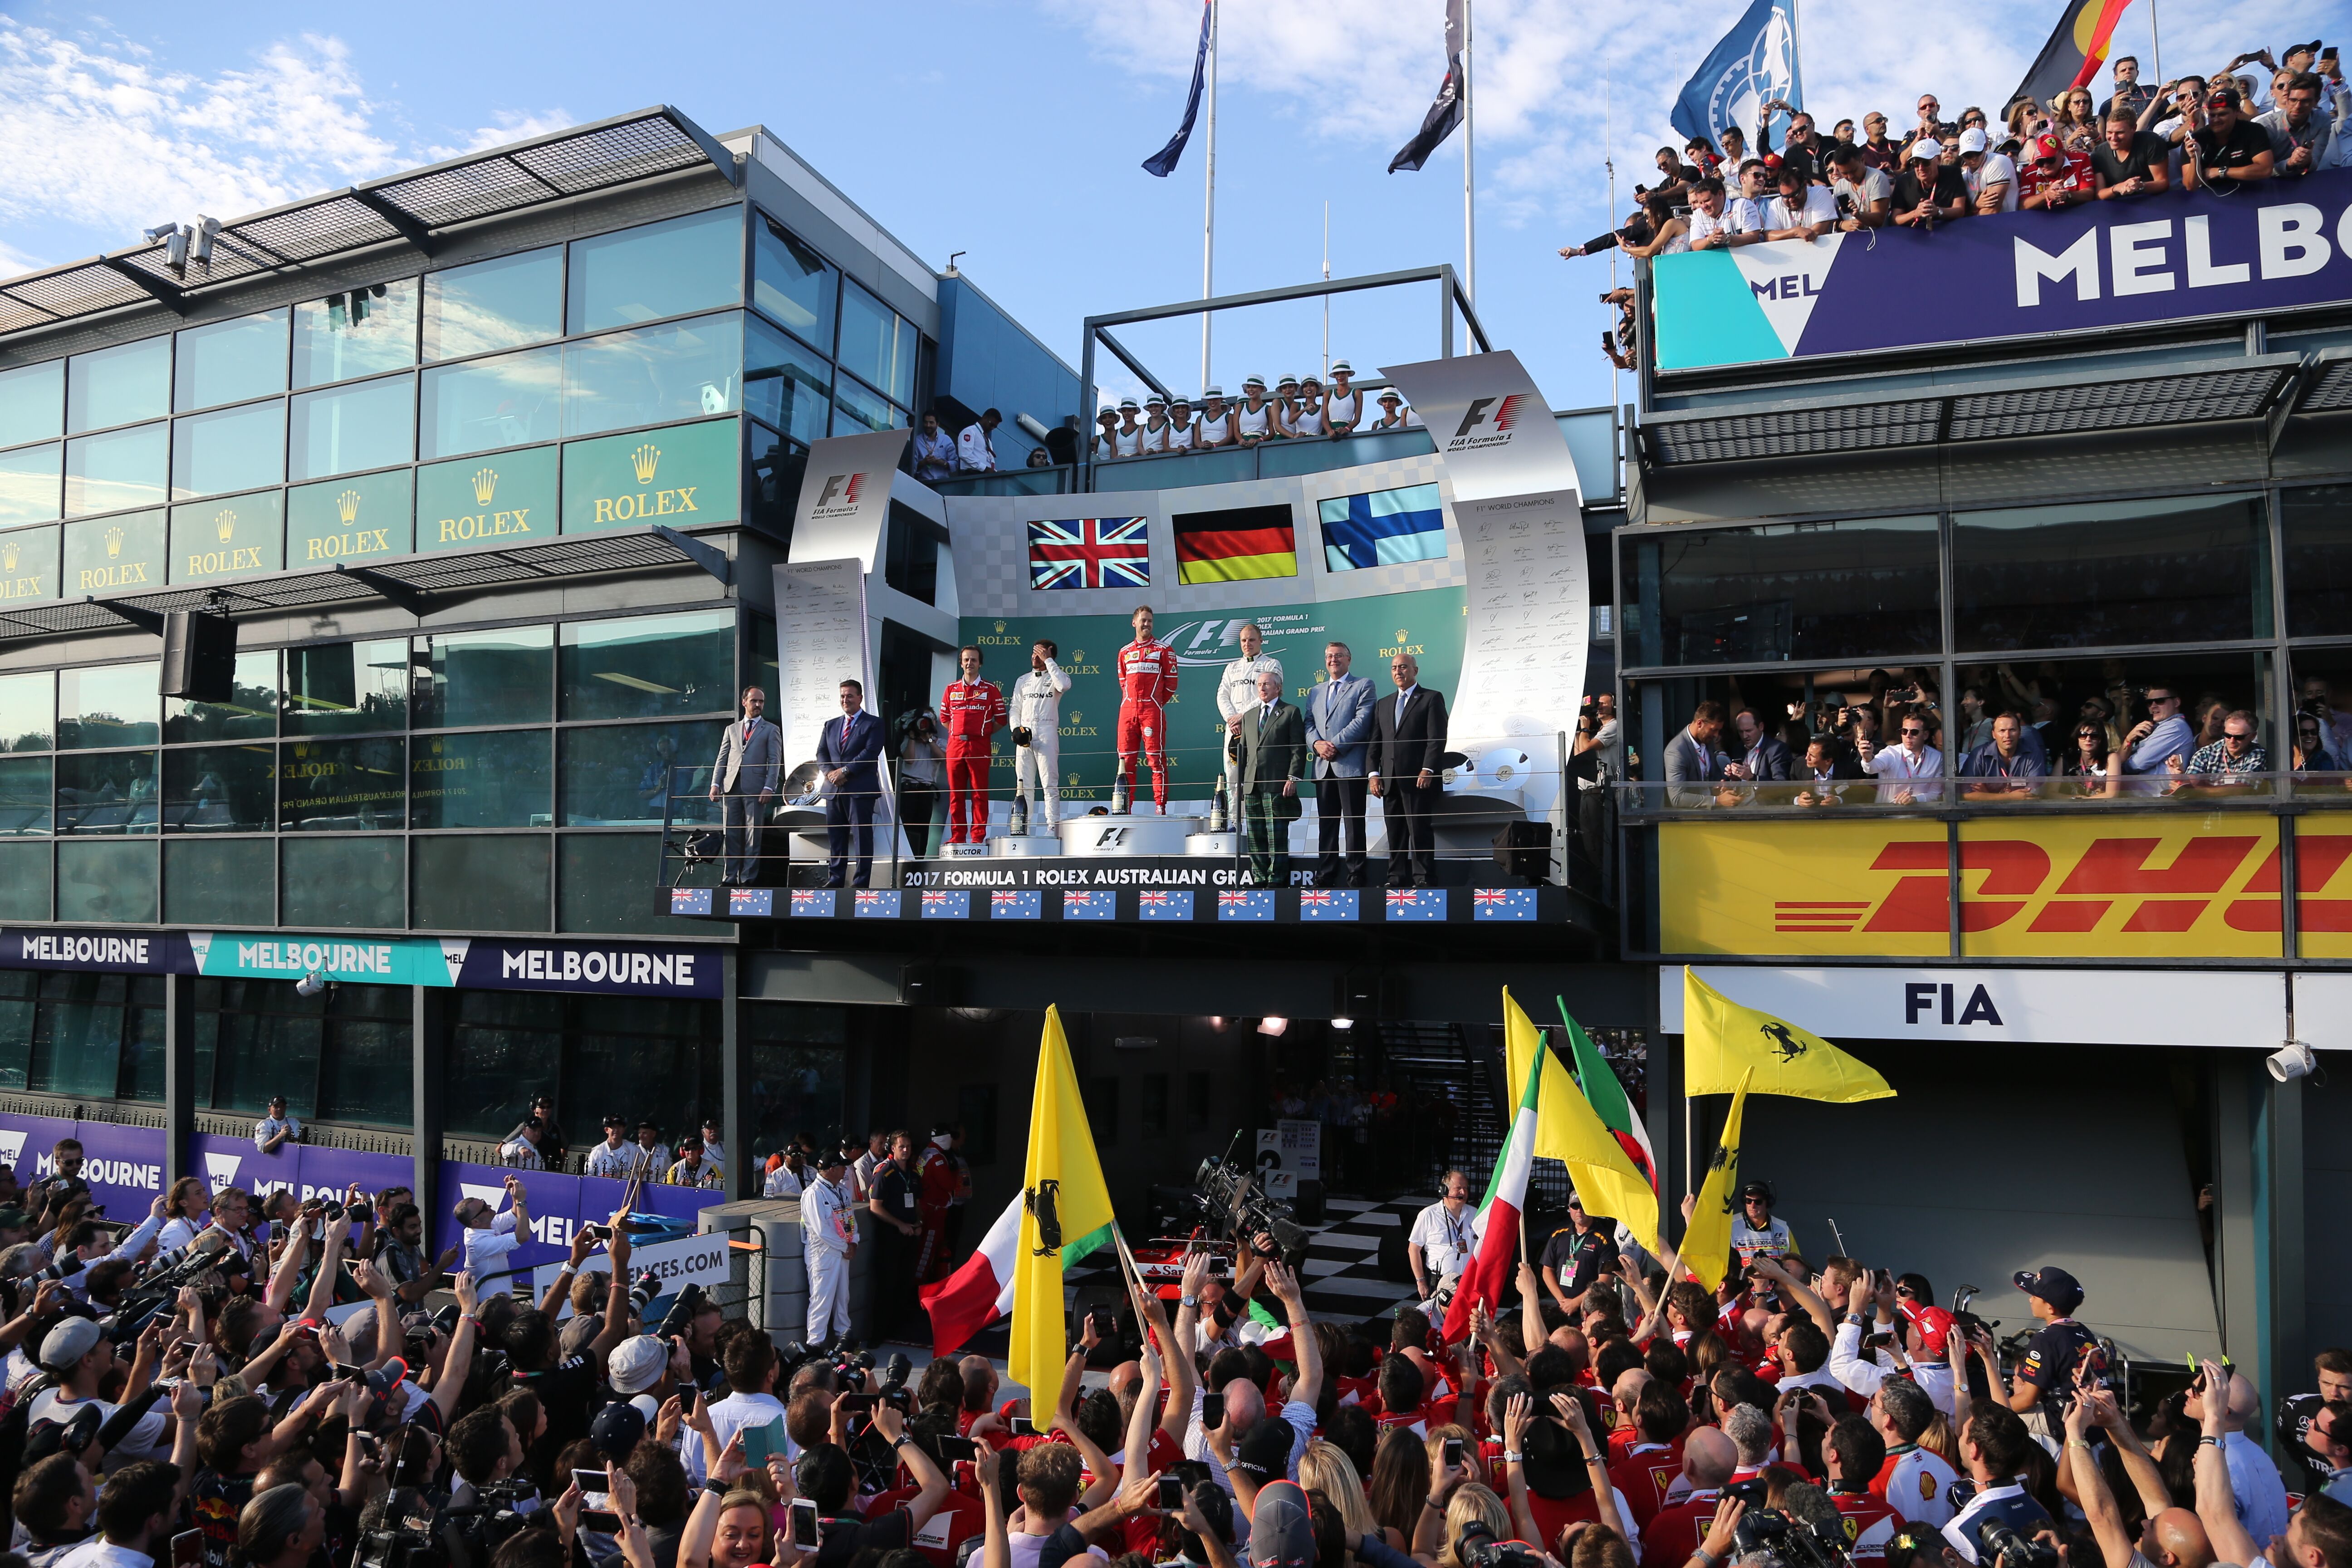 Melbourne podium with F1 Drivers